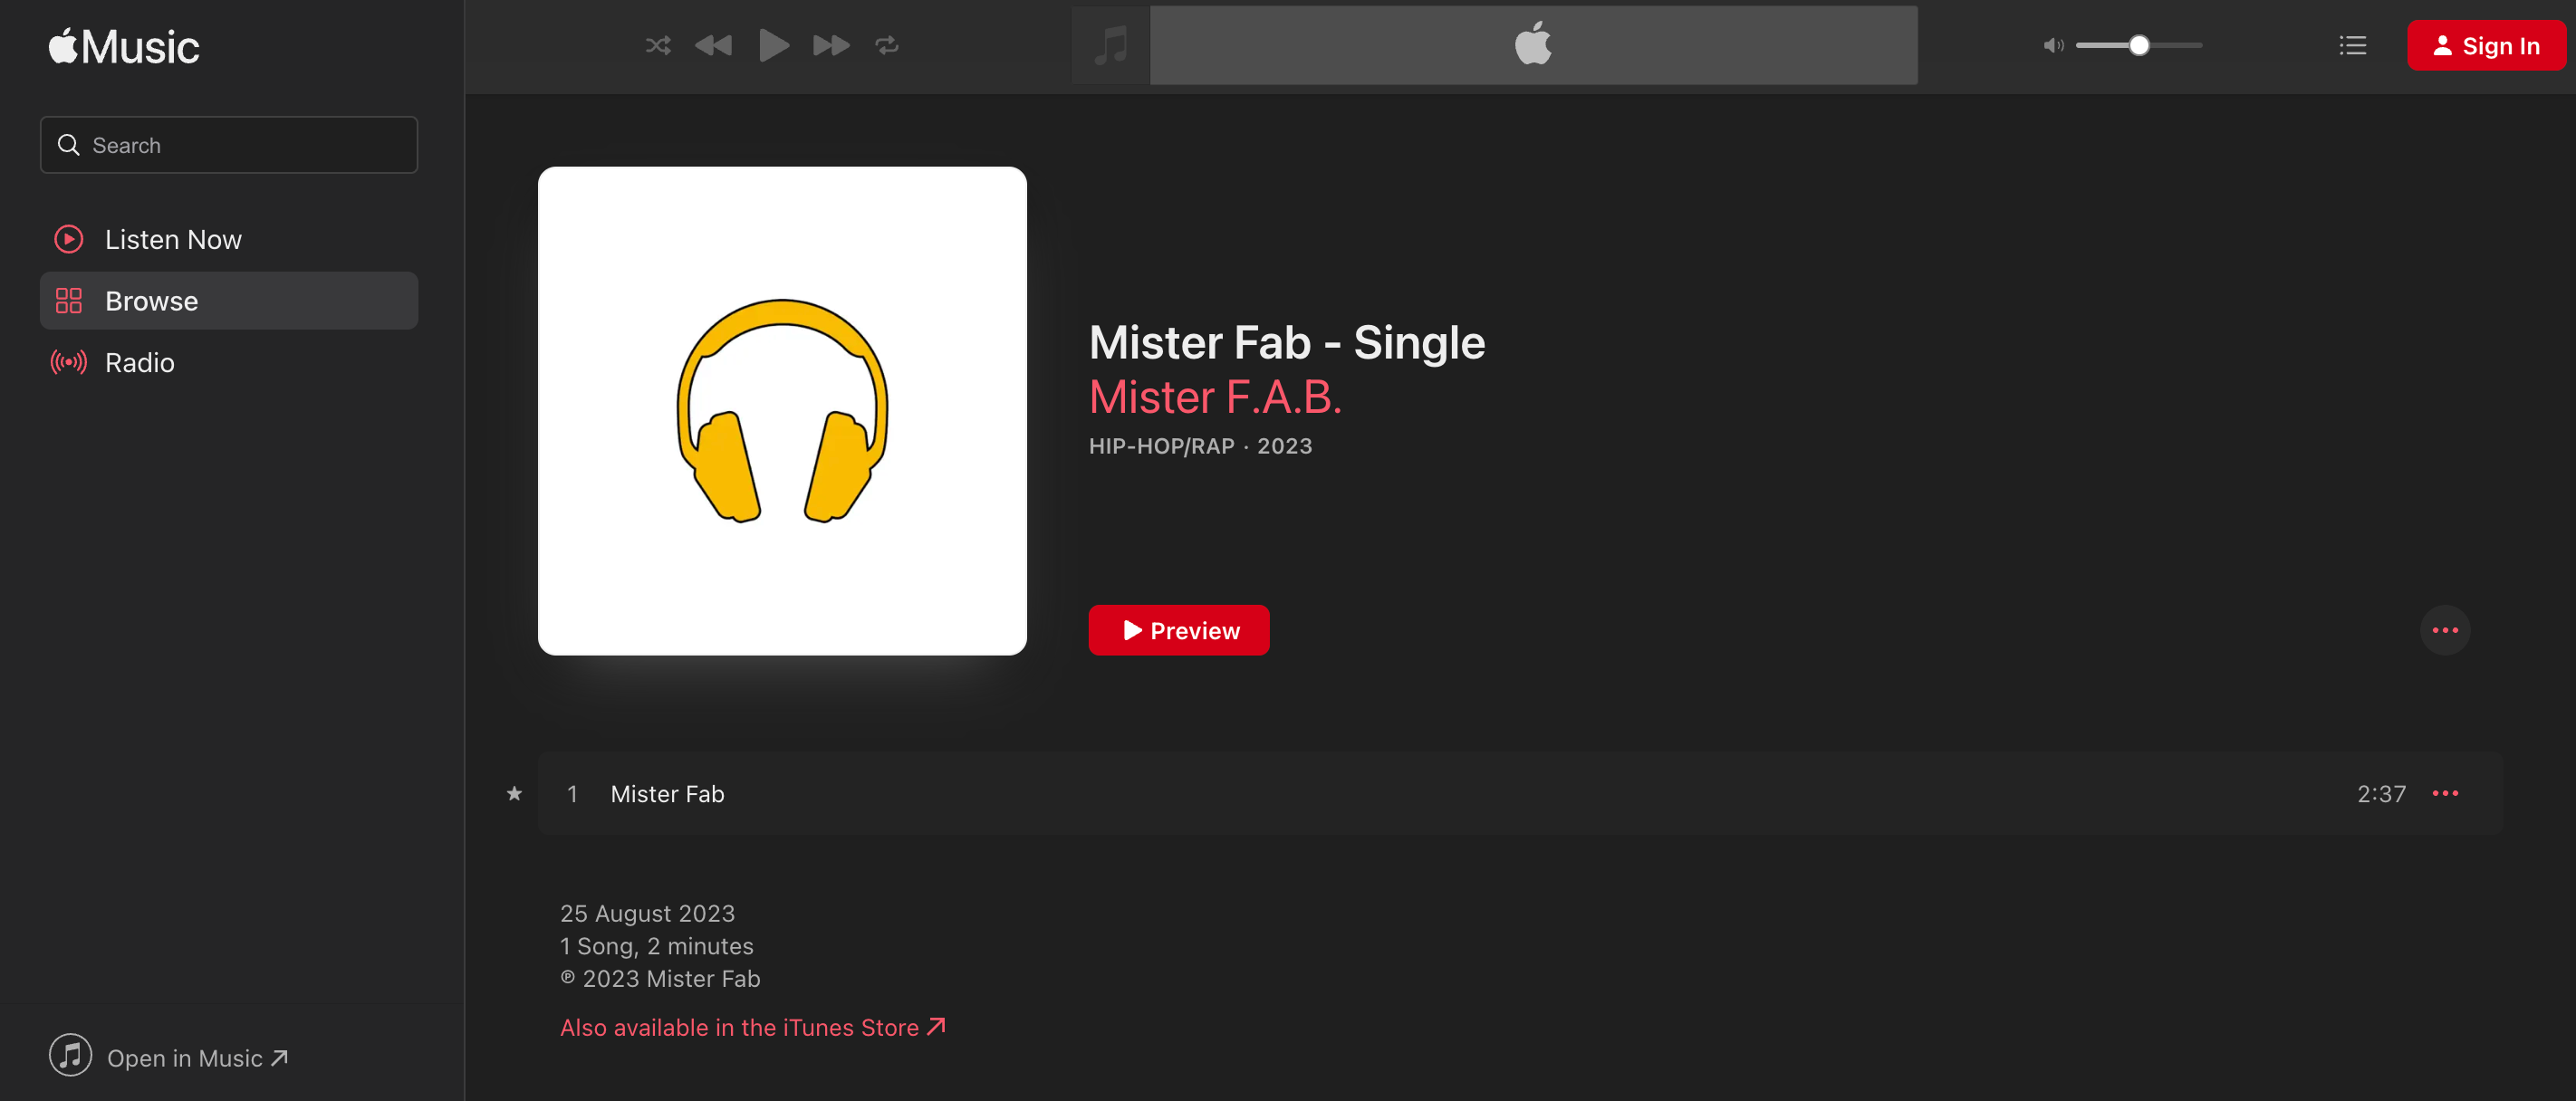 Mister Fab single by Mister F.A.B on Apple Music